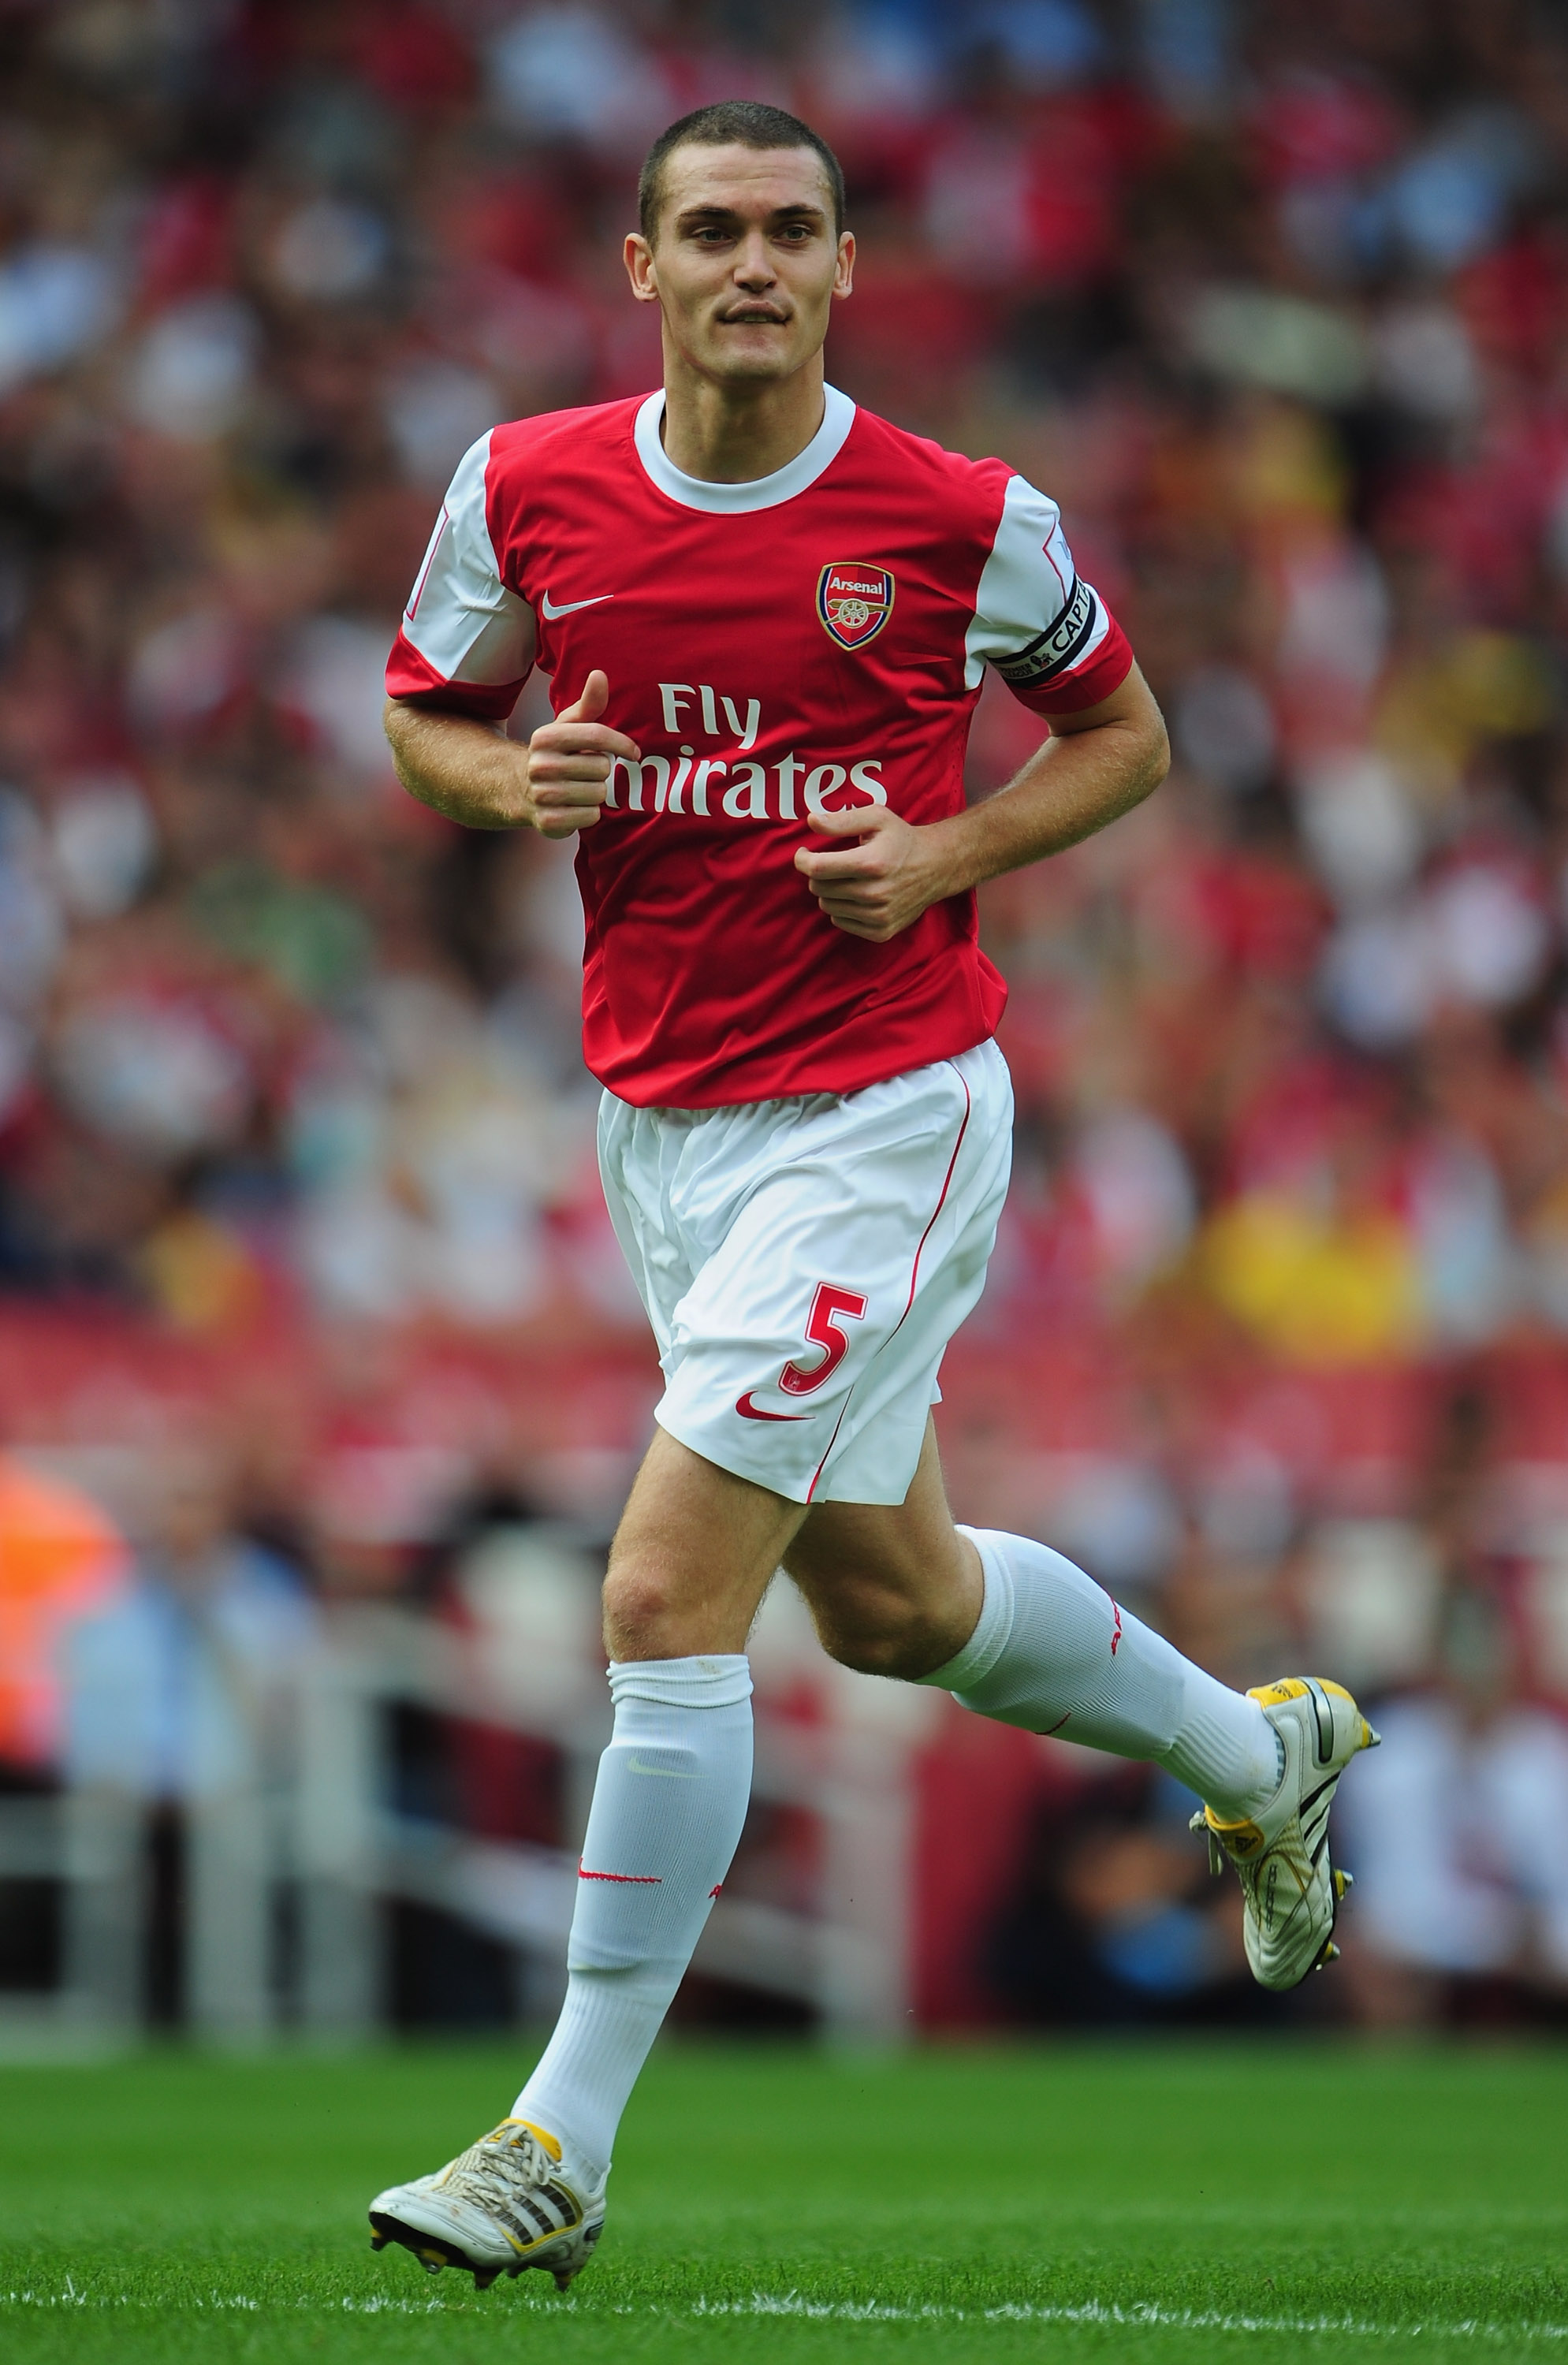 LONDON, ENGLAND - JULY 31:  Thomas Vermaelen of Arsenal in action during the Emirates Cup match between Arsenal and AC Milan at Emirates Stadium on July 31, 2010 in London, England.  (Photo by Mike Hewitt/Getty Images)